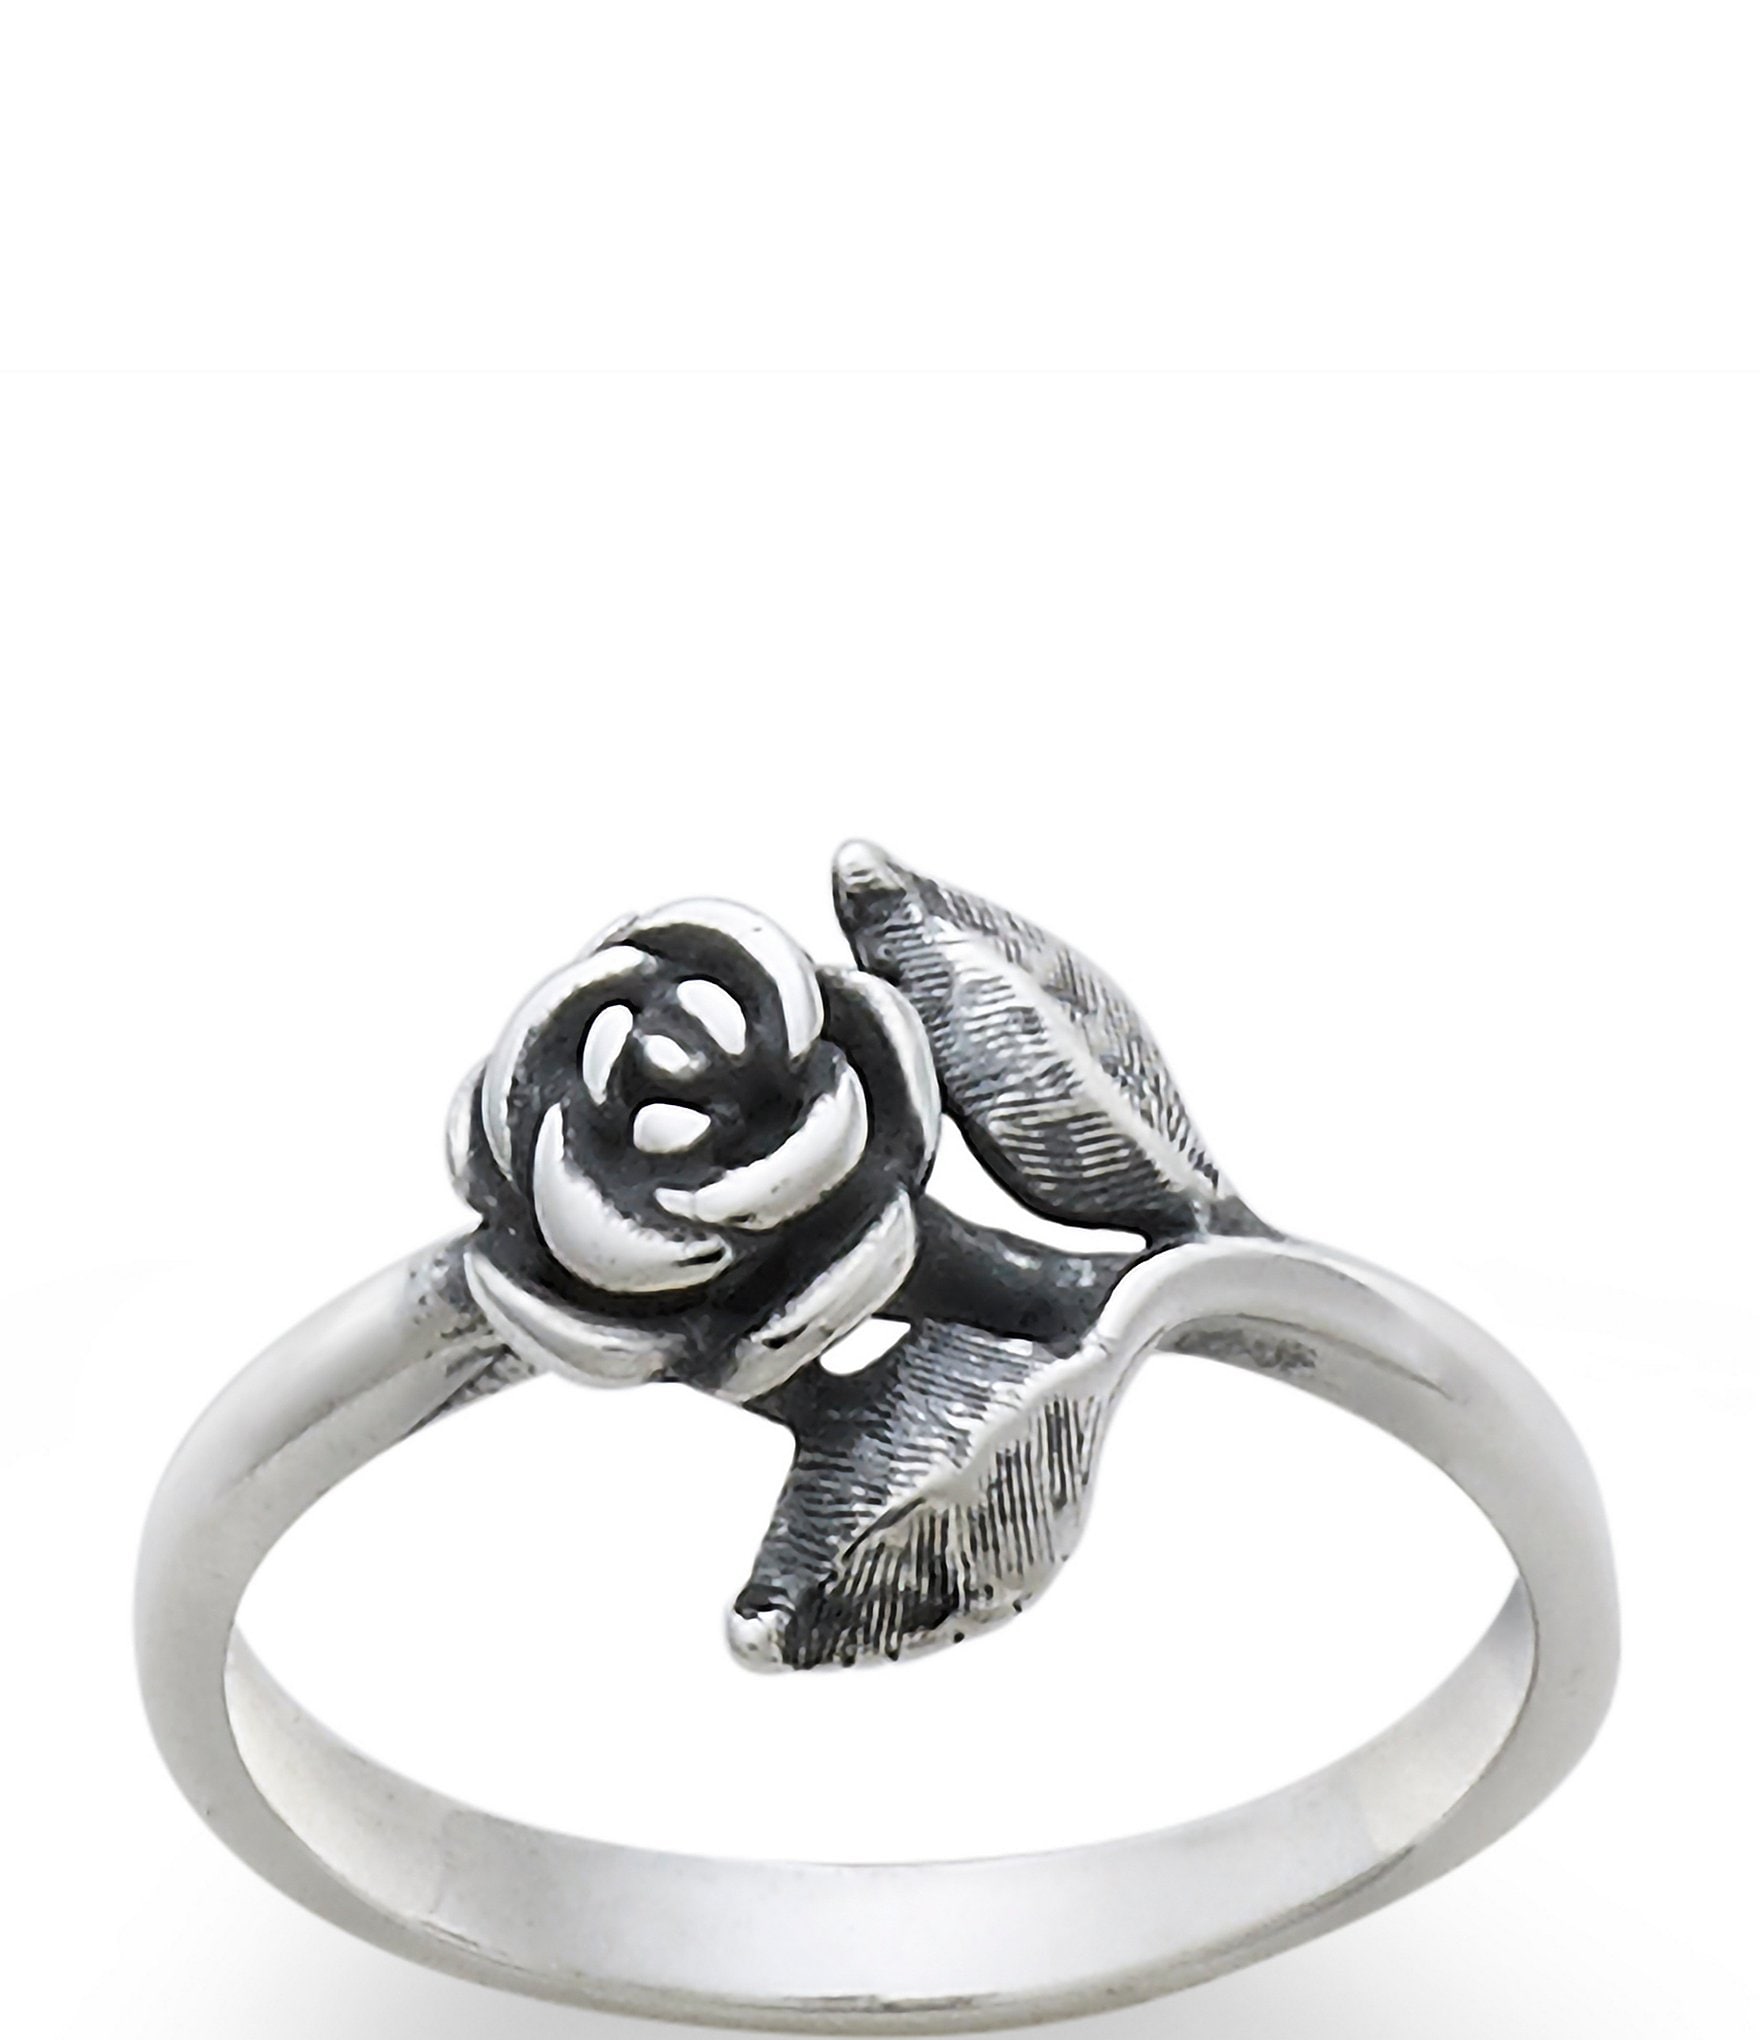 James Avery Small Rose Ring - 4.5